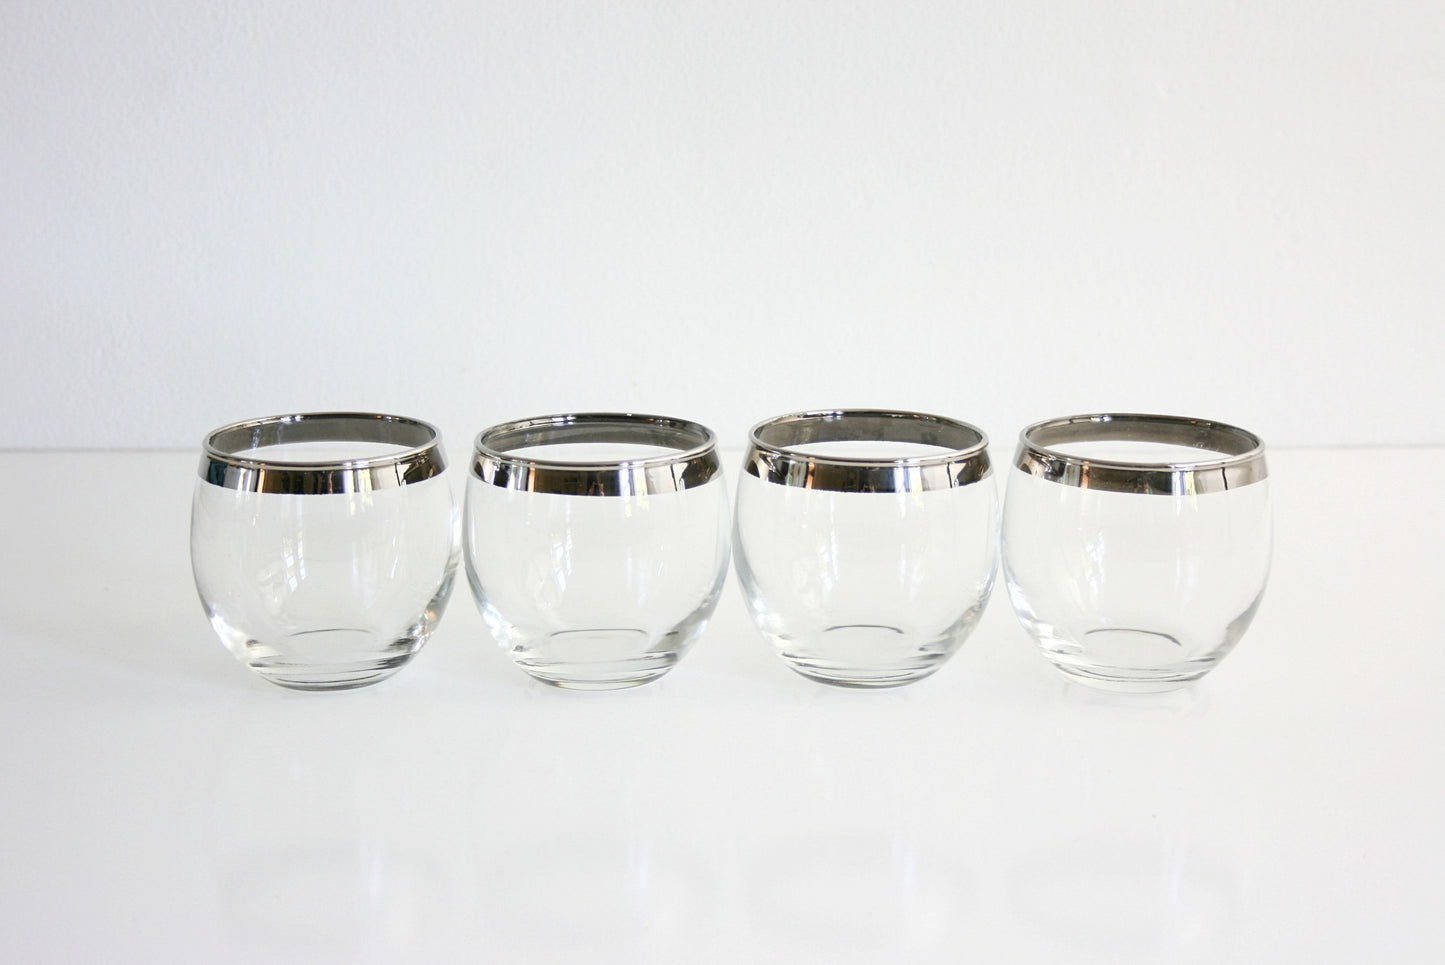 SOLD - Mid Century Modern Dorothy Thorpe Roly Poly Glasses / Vintage Silver Rimmed Barware